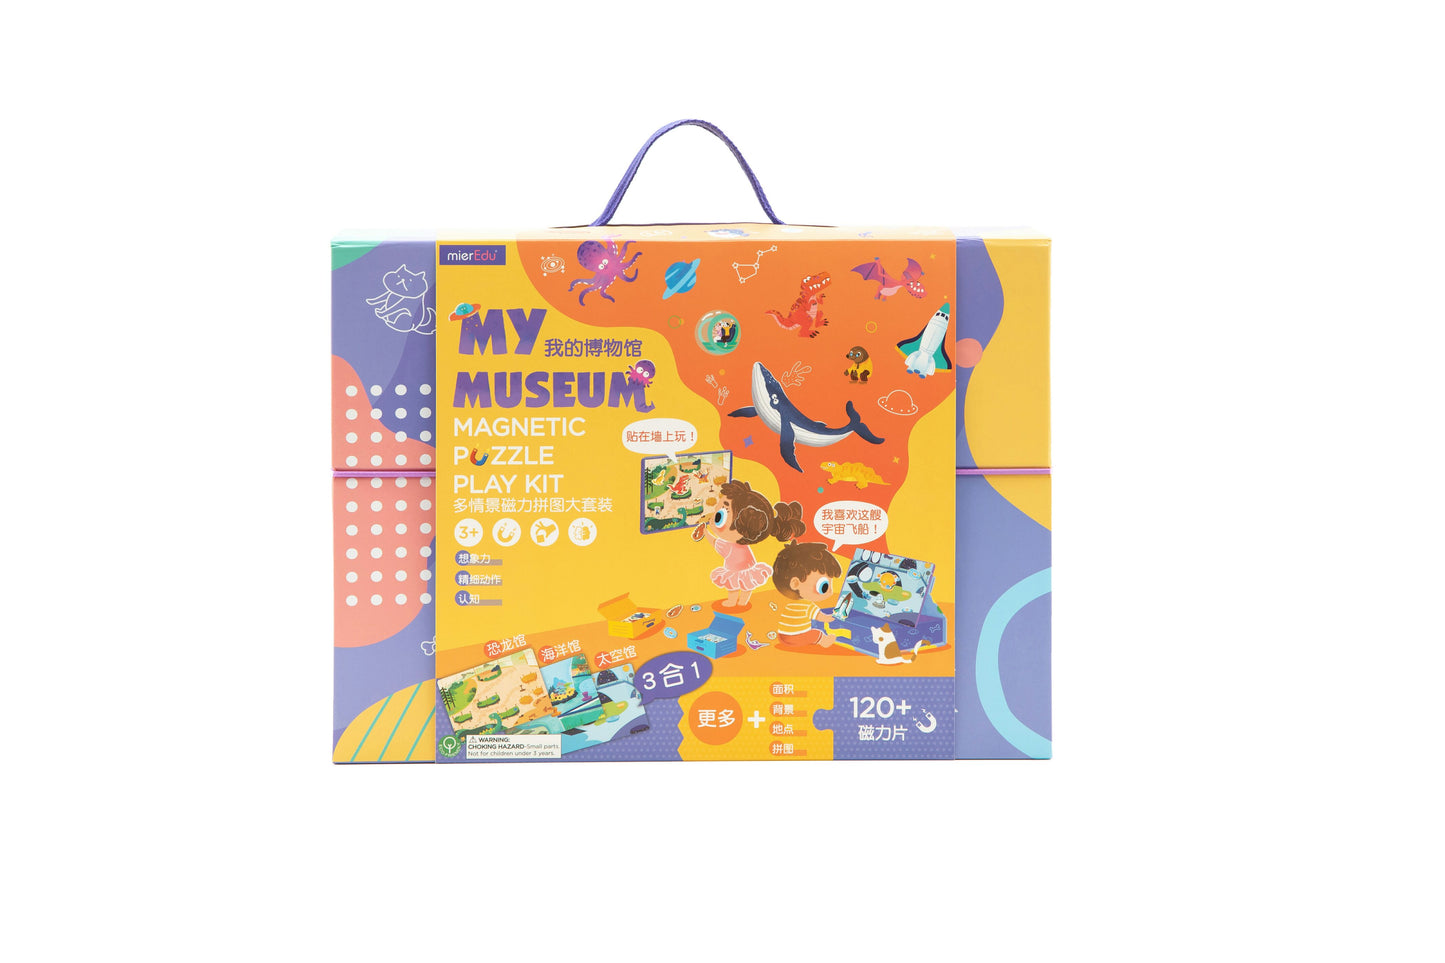 MAGNETIC PUZZLE PLAY KIT - MY MUSEUM